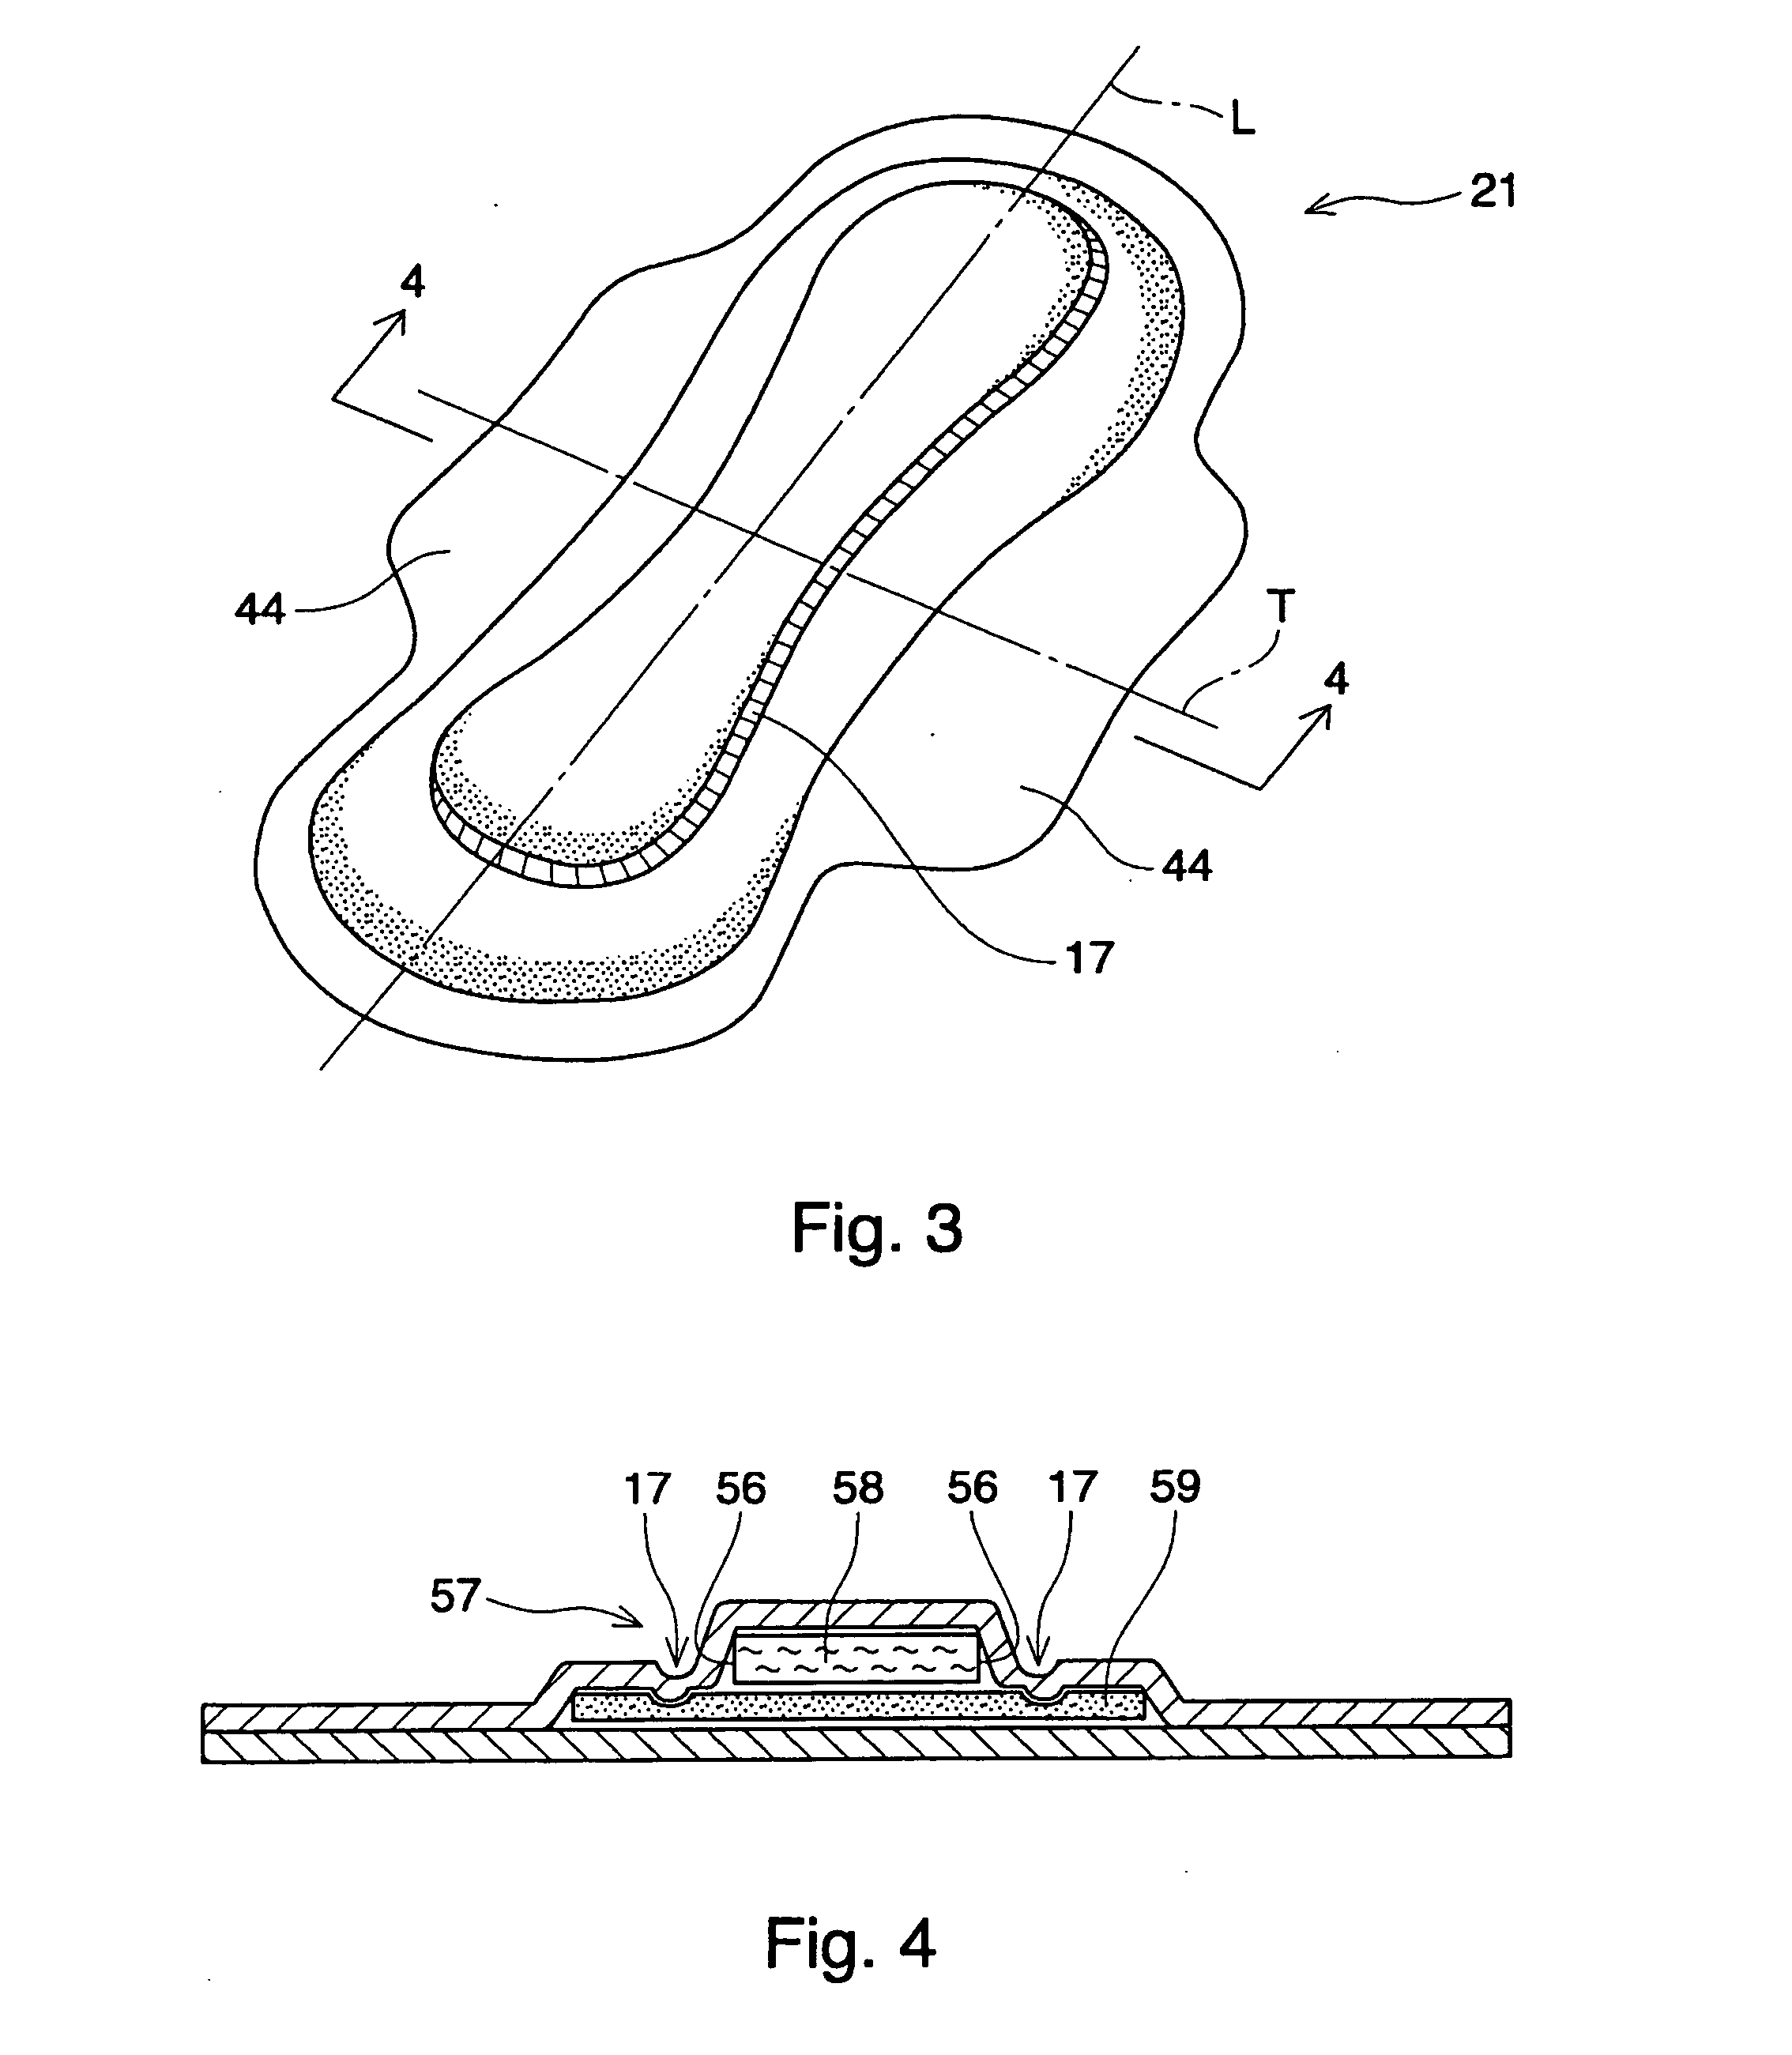 Absorbent article including airlaid mixture material containing thermoplastic fibers treated with phosphate ester or sulfate ester